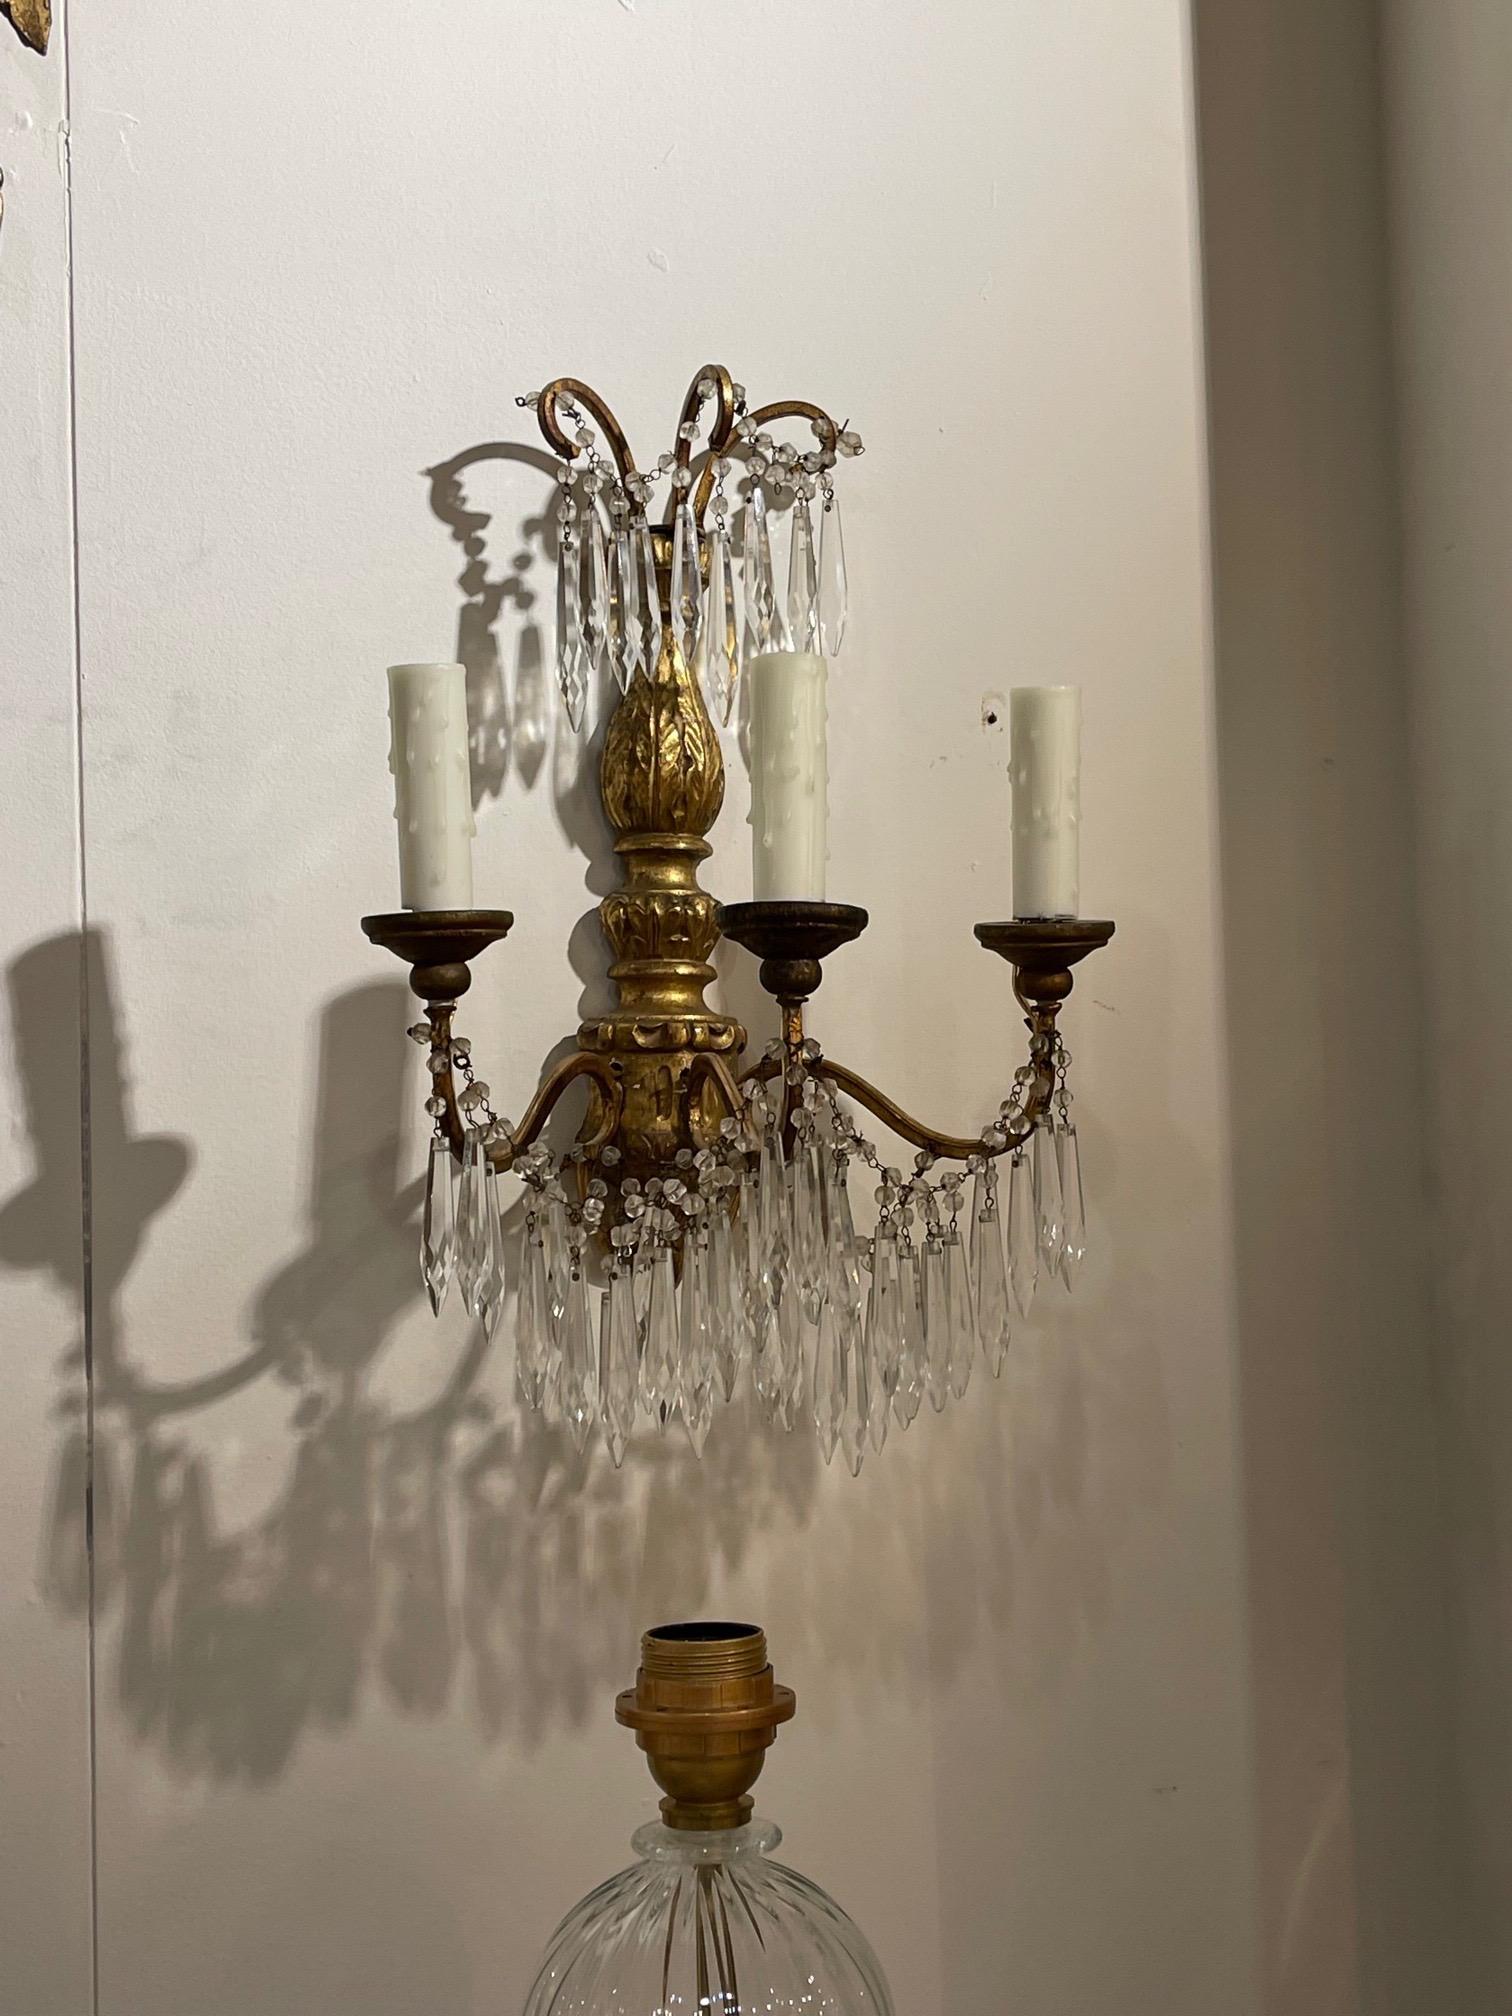 Very fine pair of antique Italian giltwood and crystal 3 light wall sconces. This pair has a pretty carved base along with beautiful dangling crystals. Creates a classic look!.